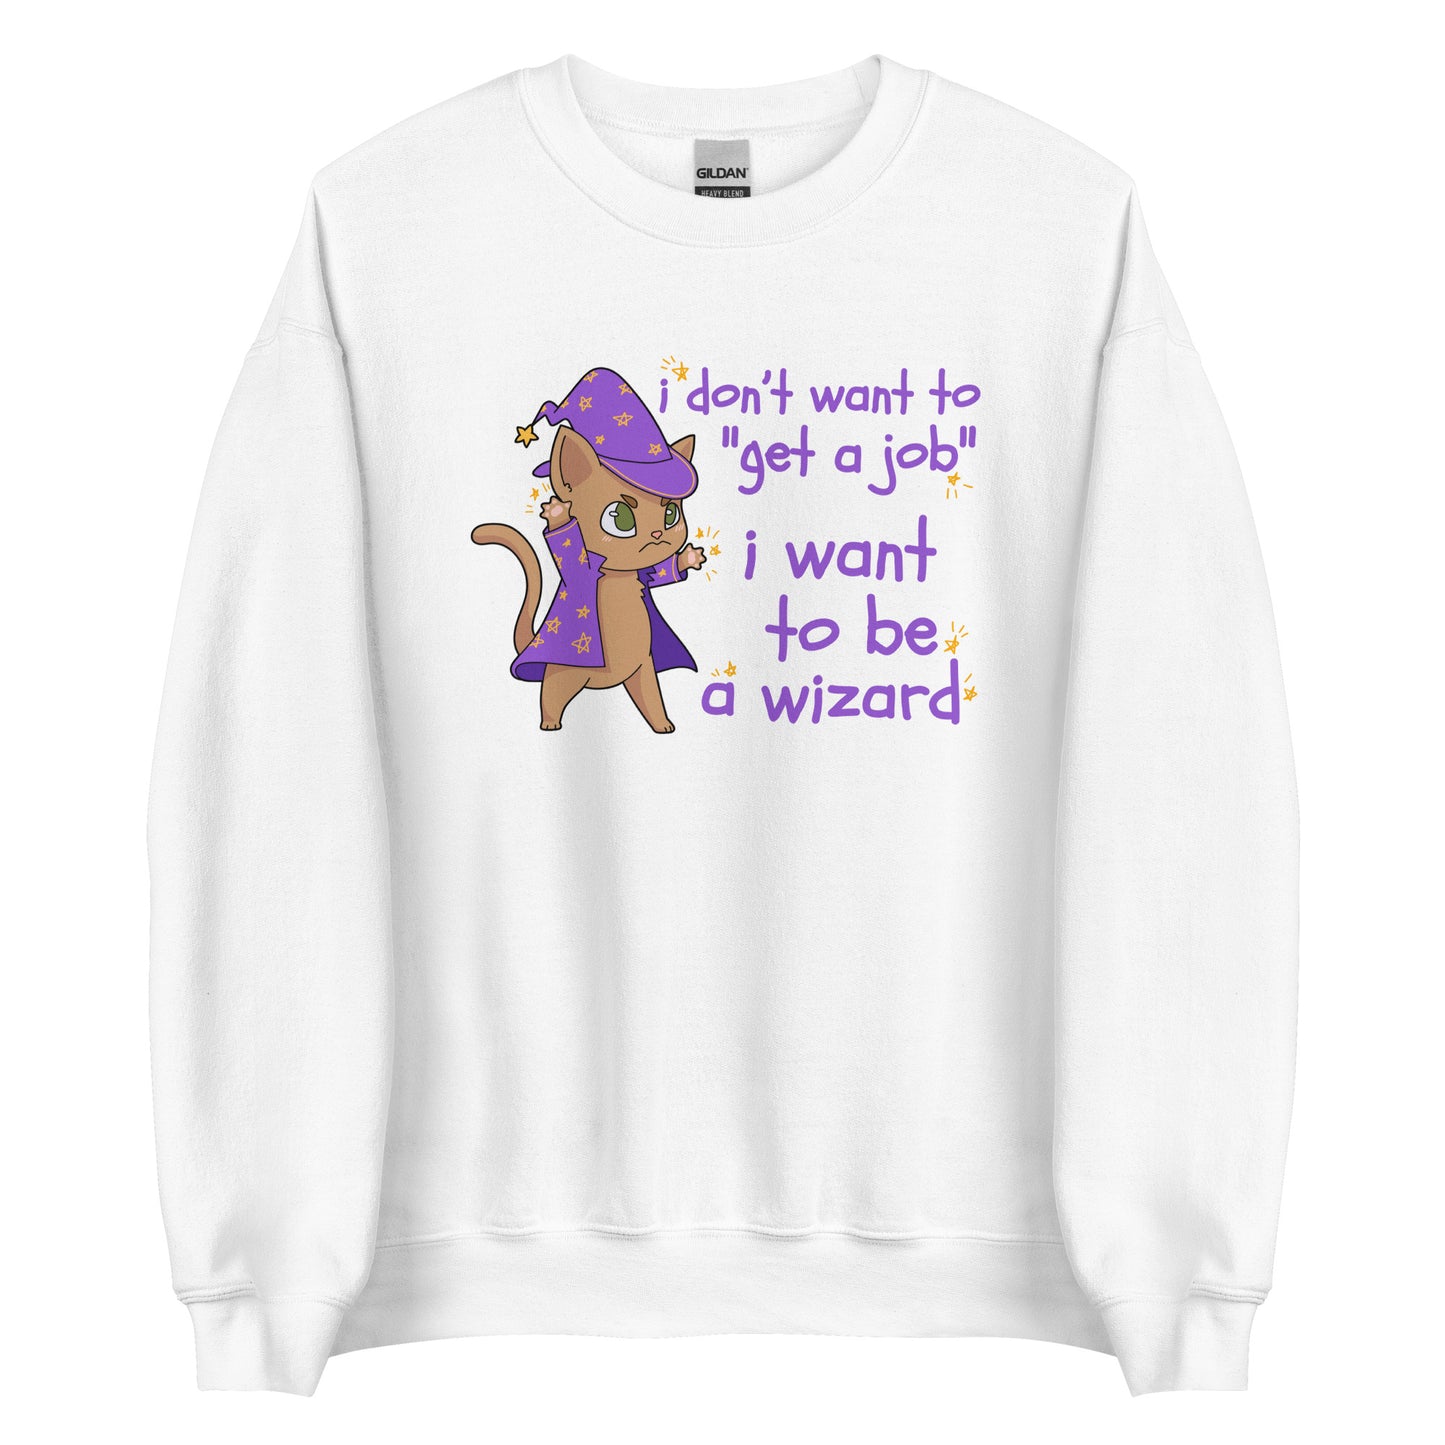 A white crewneck sweatshirt featuring an illustration of a small cat wearing wizard robes and a hat. Text alongside the cat reads "i don't want to "get a job". i want to be a wizard."